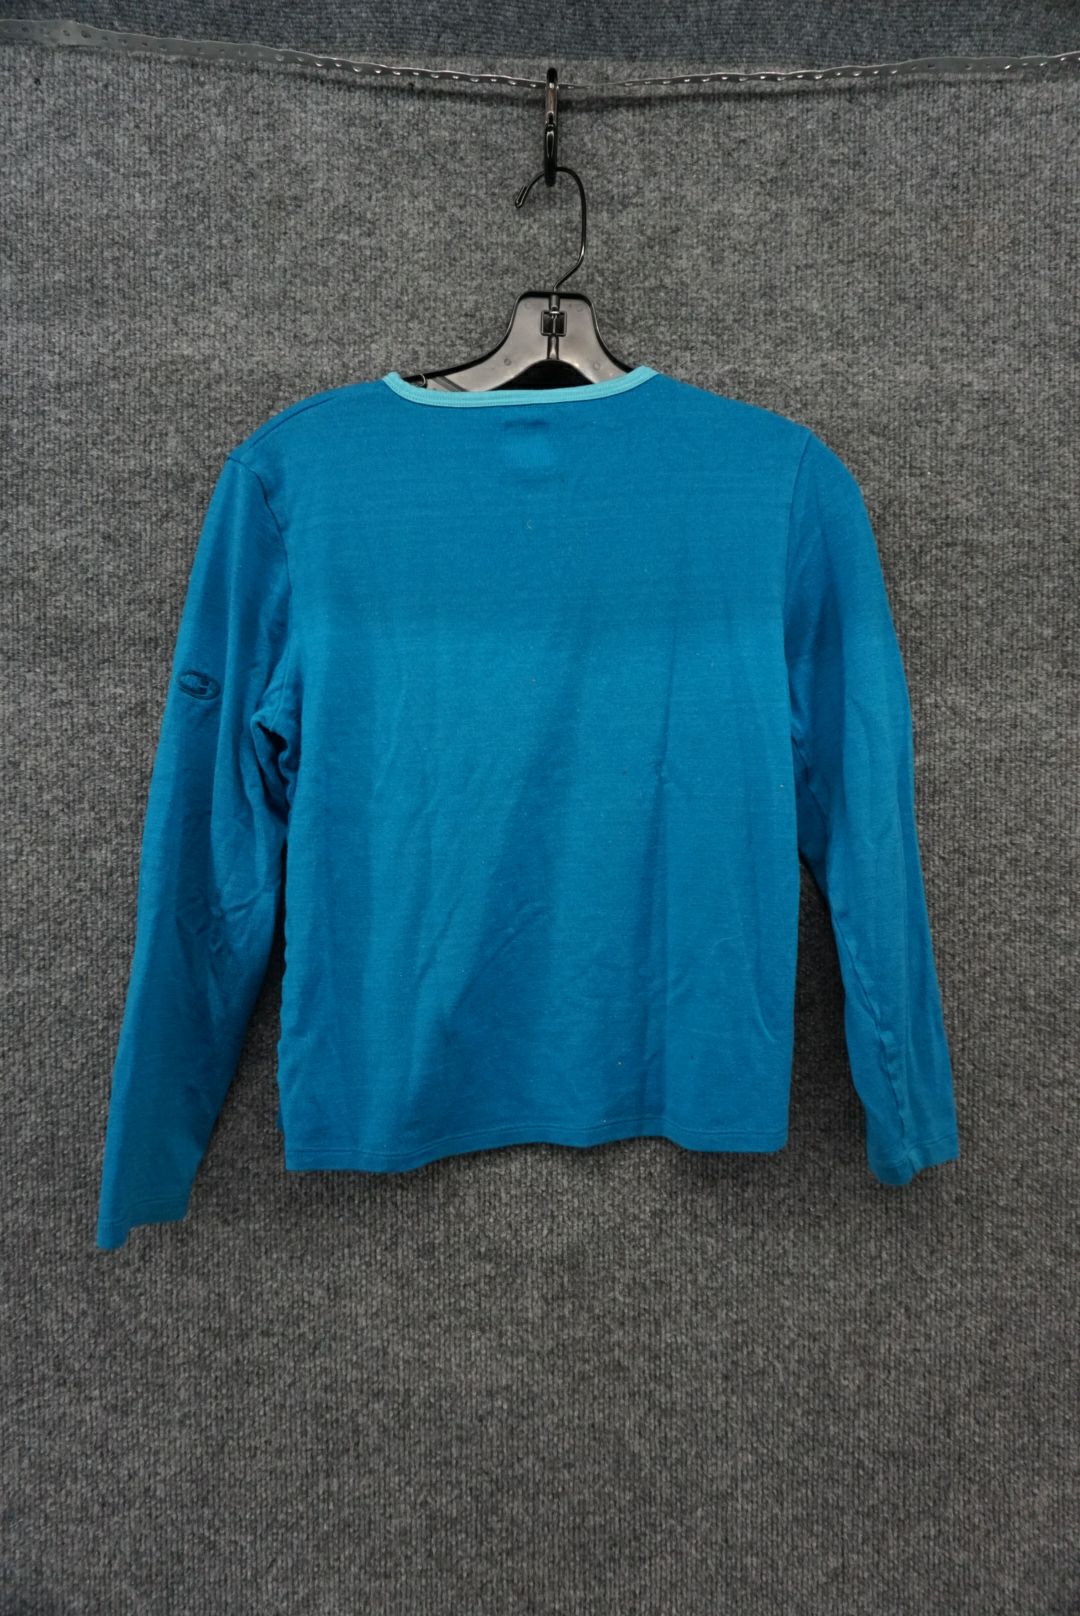 Ice Breaker Size Y Medium Youth Base Layer Top